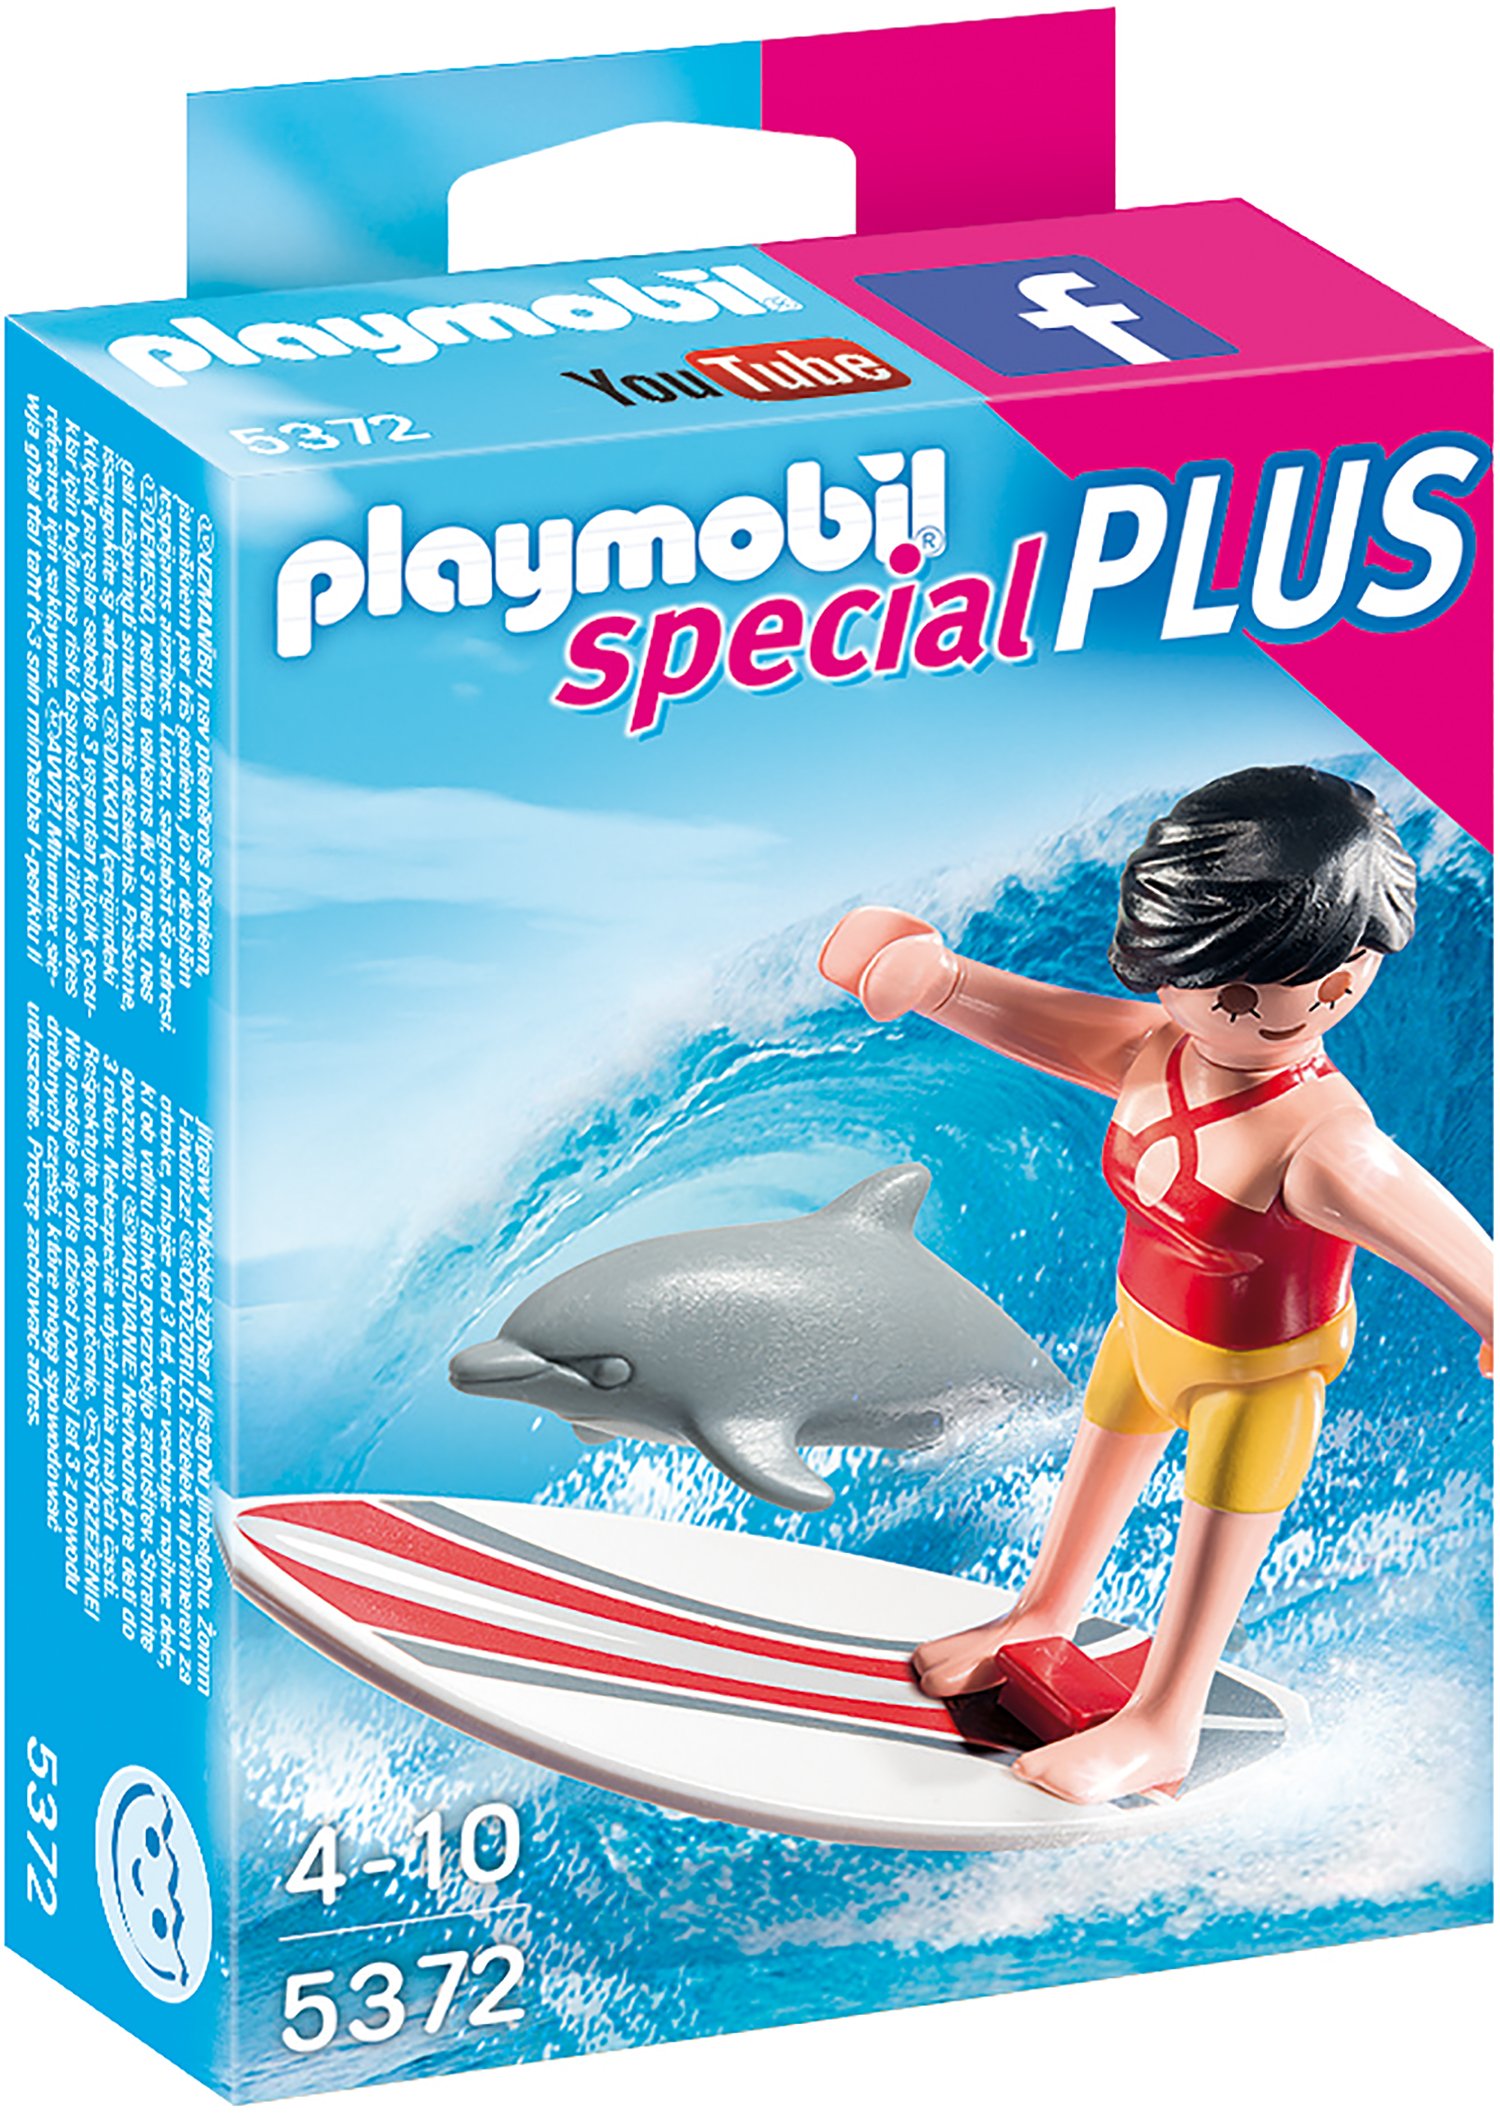 Playmobil Toy With Surf Board